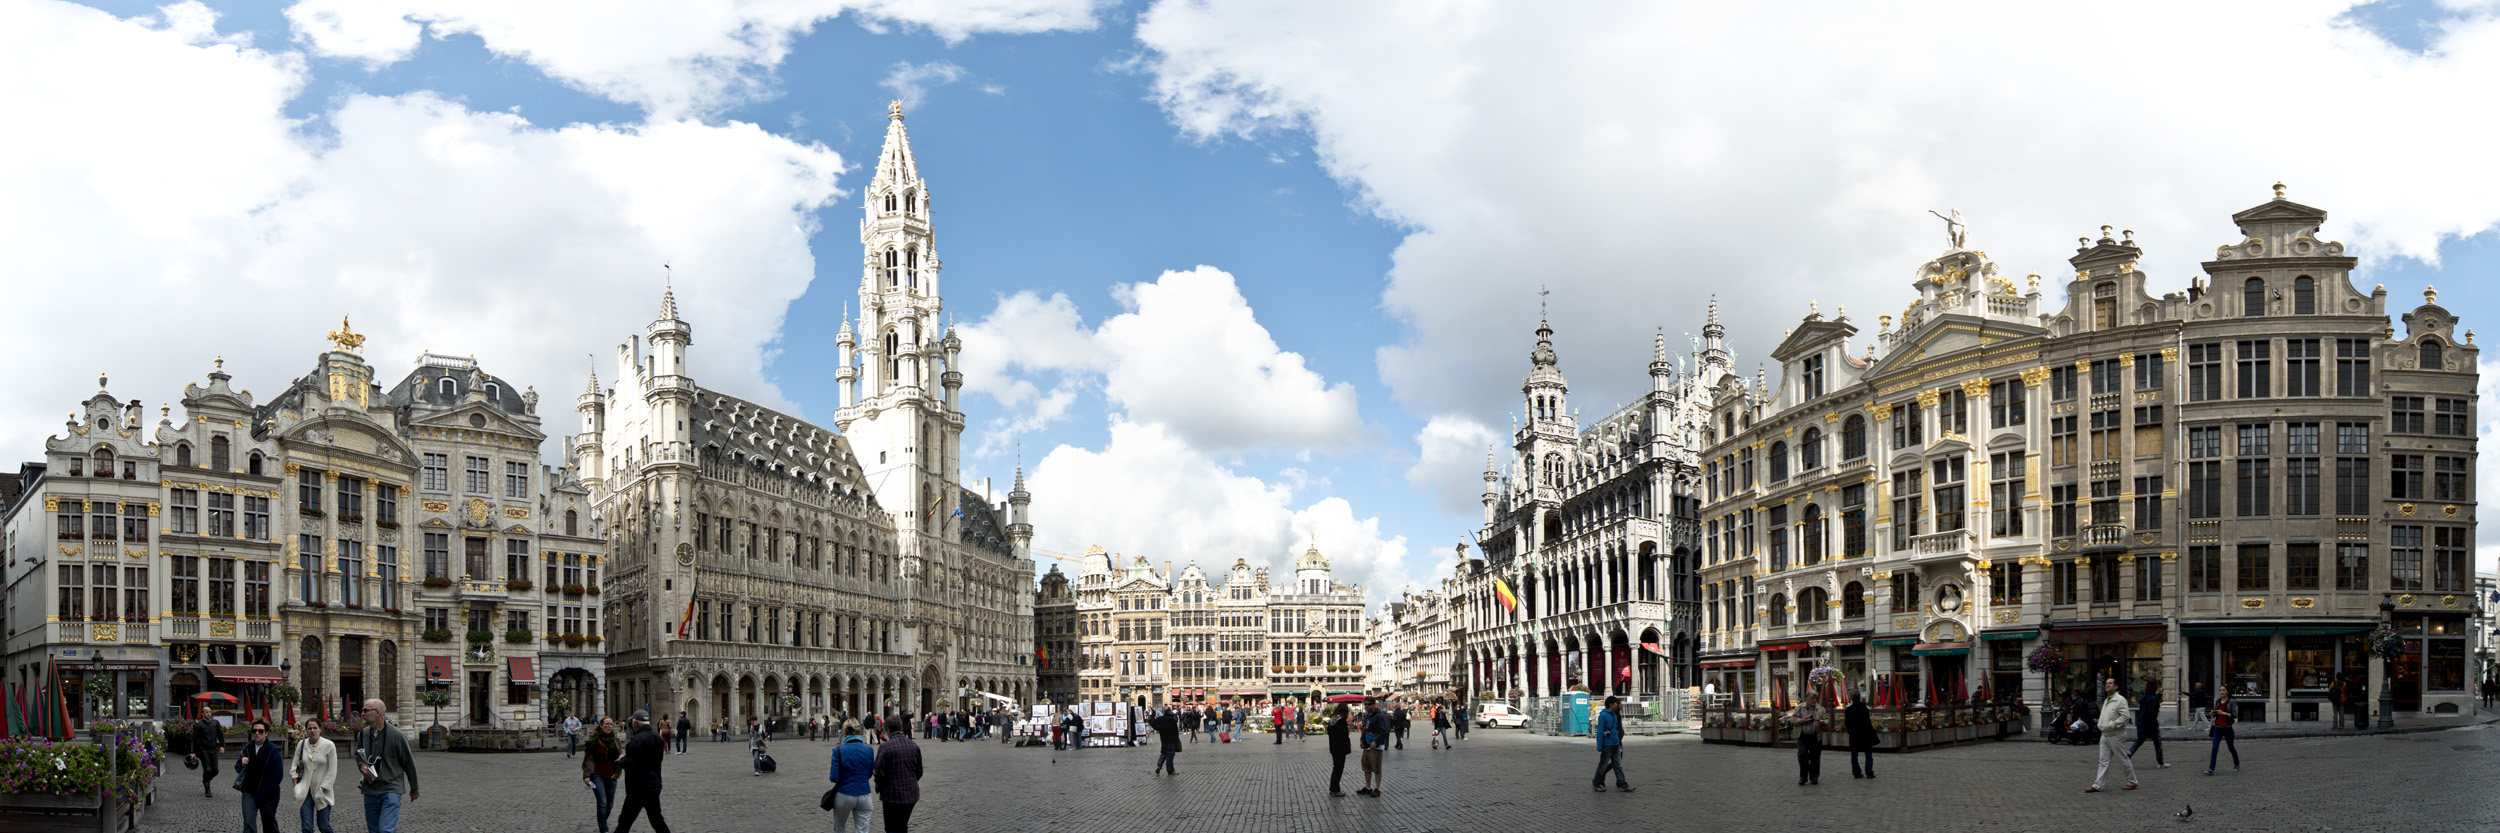 Brussels_Panorama_(8293237603)